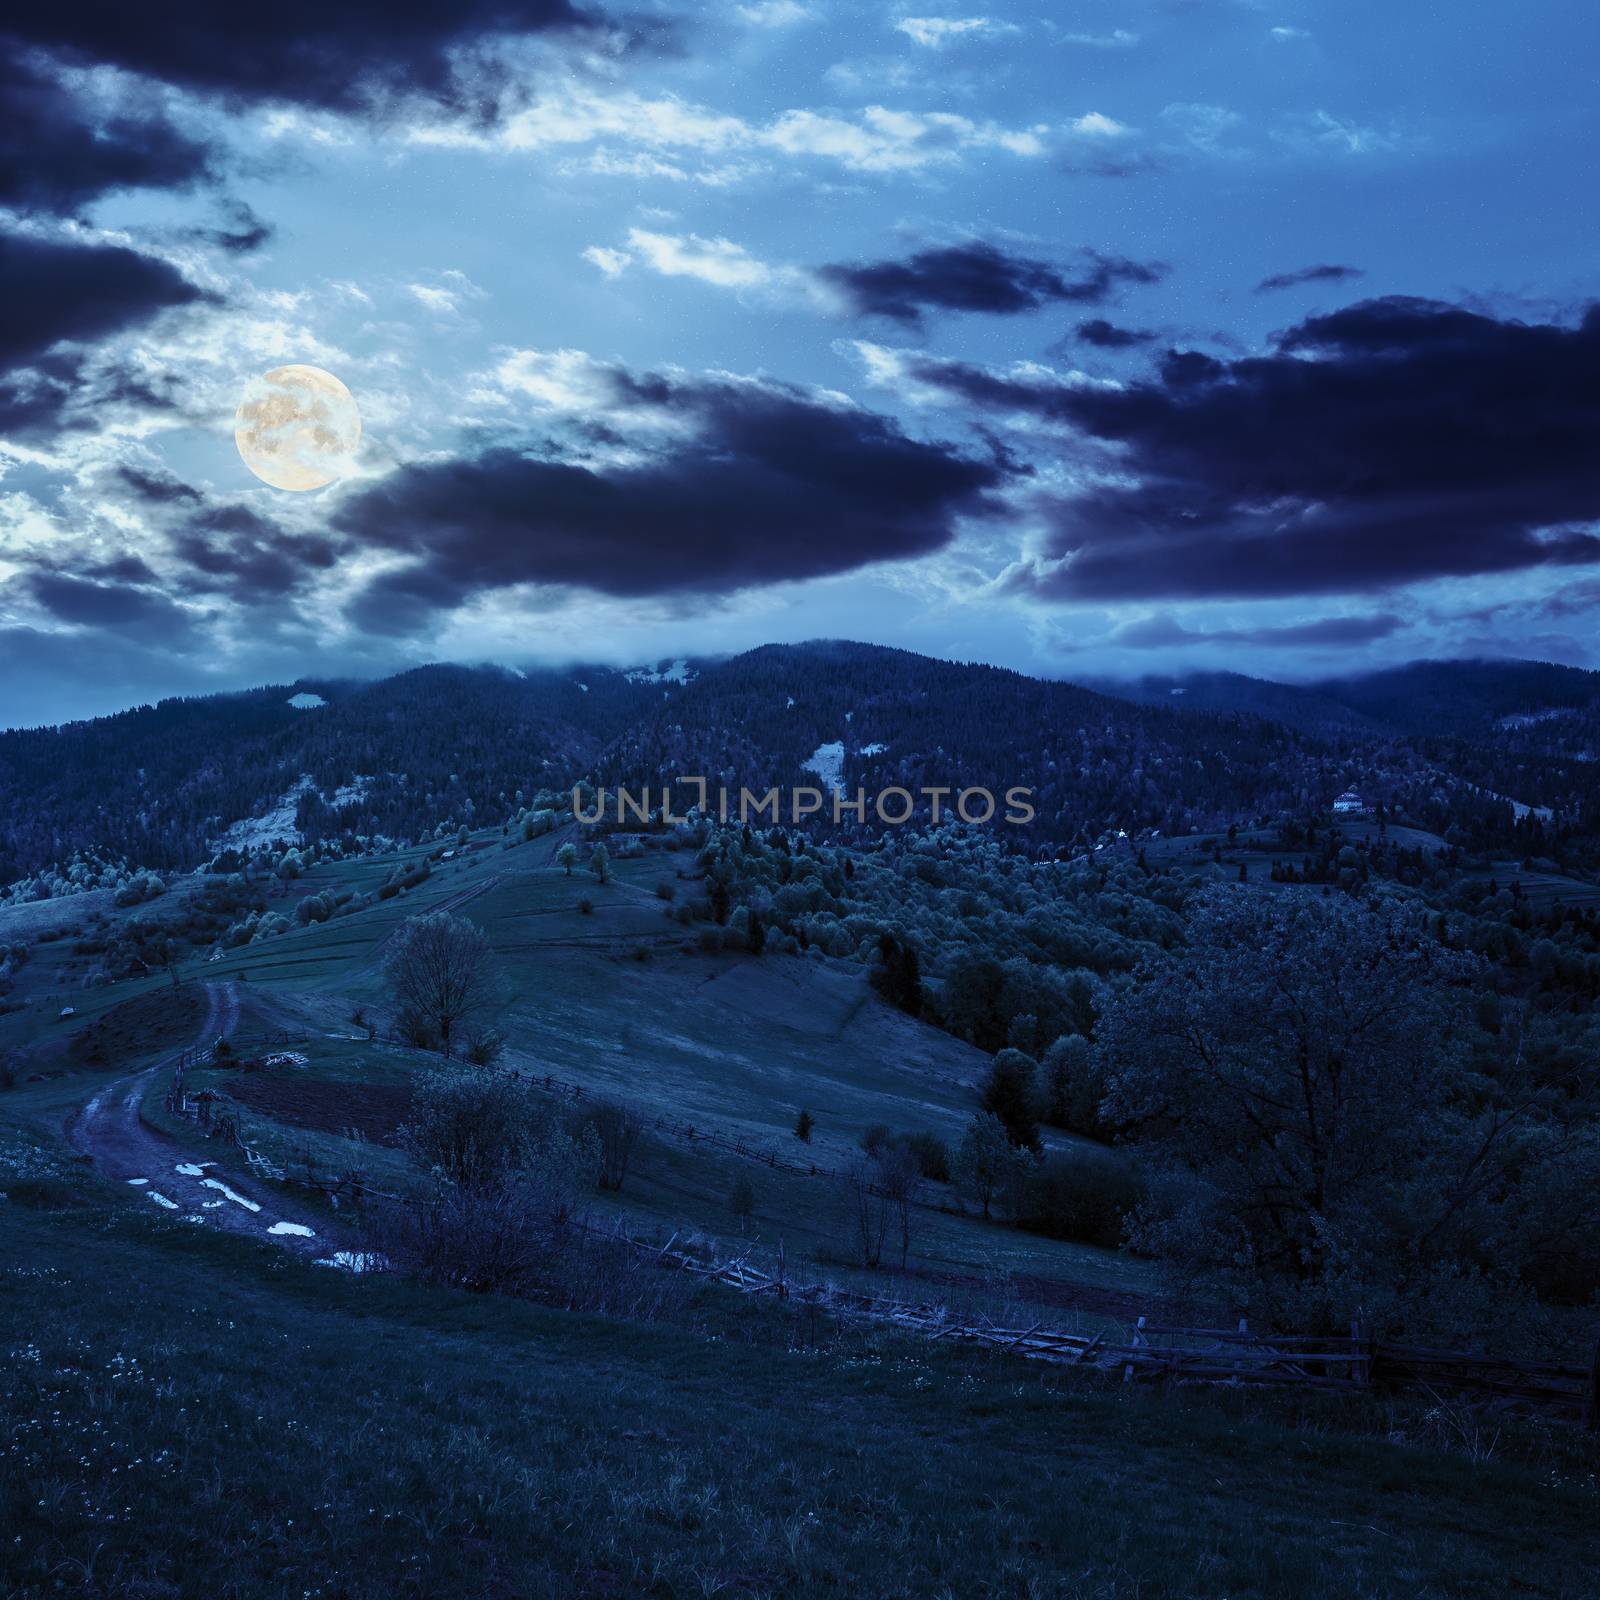 autumn landscape. fence near the meadow path on the hillside. forest in fog on the mountain. at night in full moon light